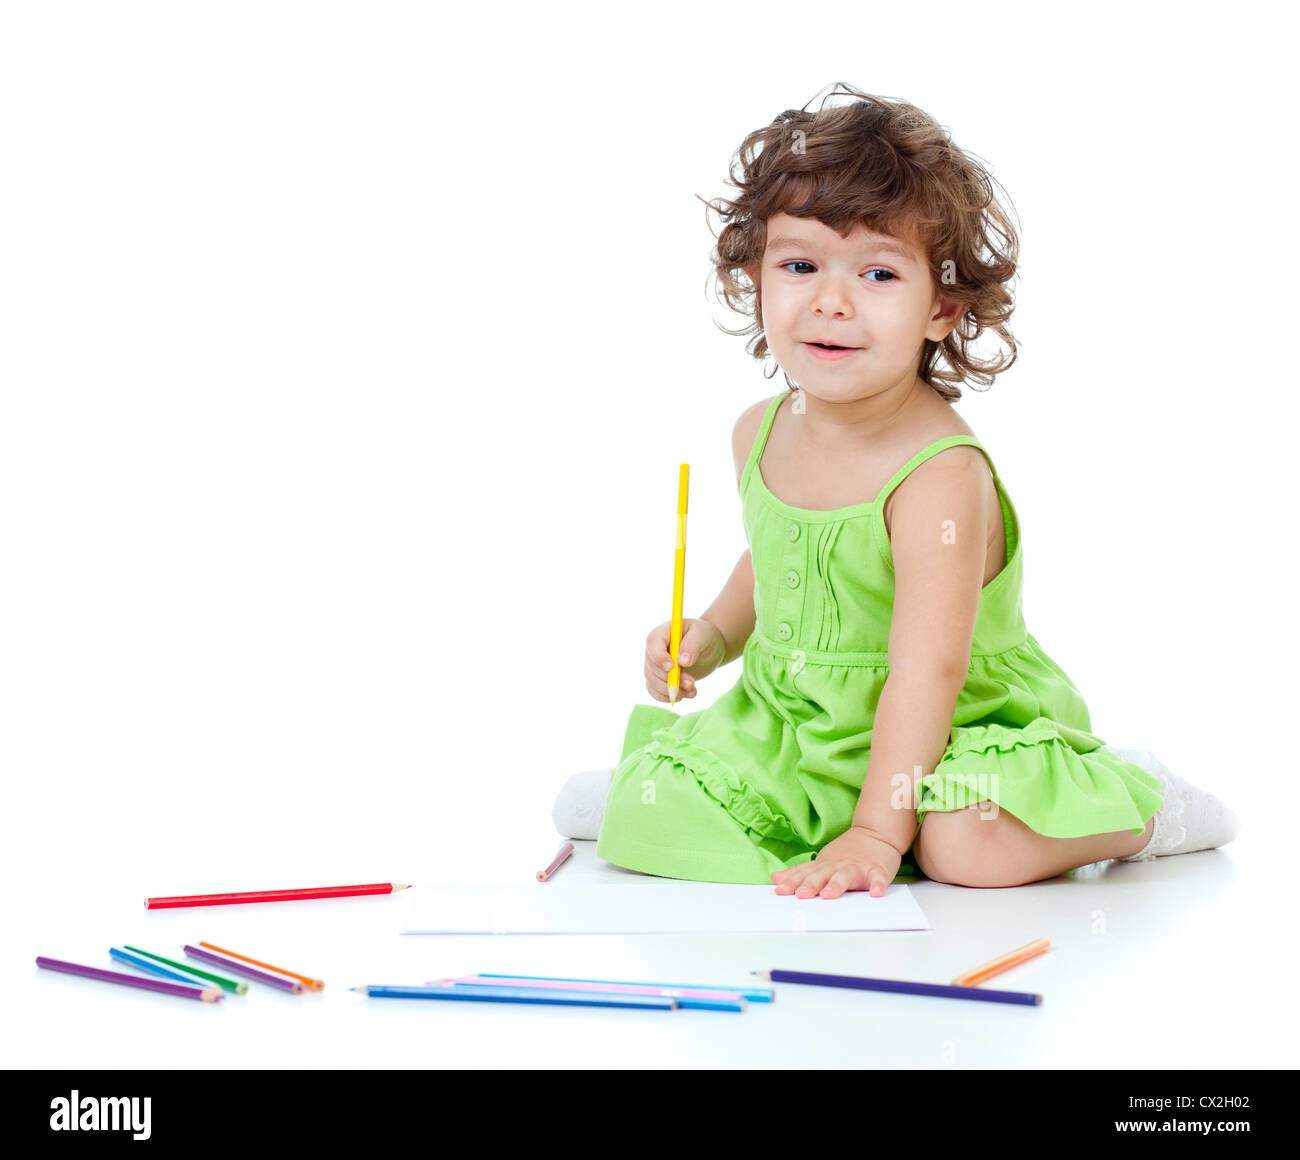 Little girl drawing with yellow pencil Stock Photo